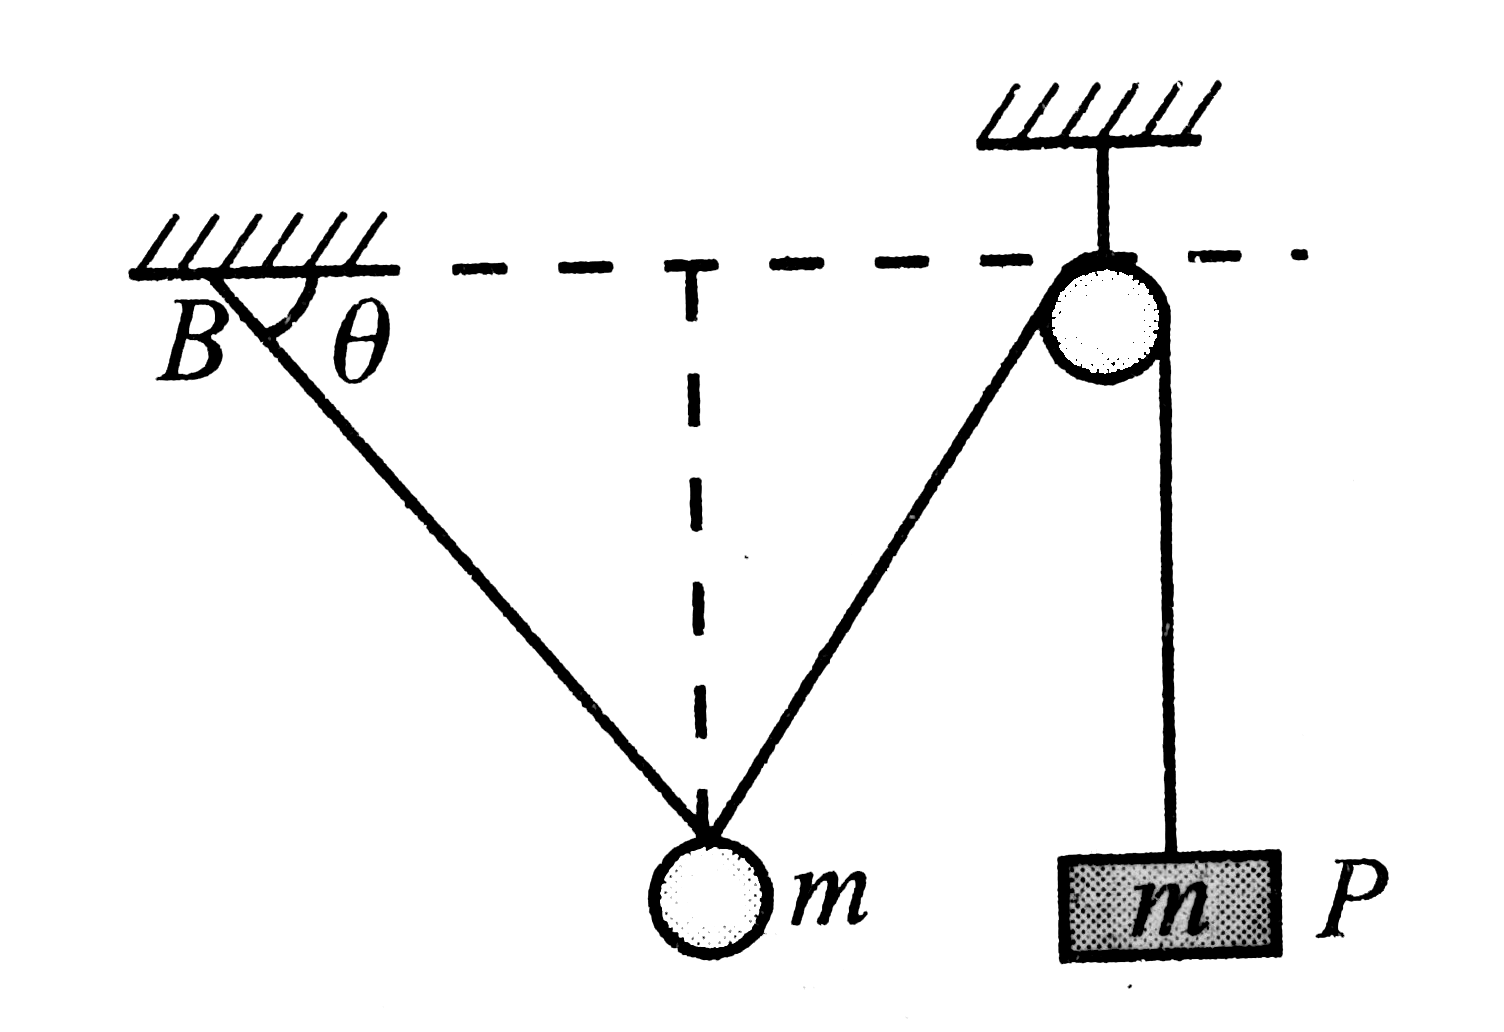 In Fig. a pulley is shown which is frictionless and a ring of mass m can slide on the string without any friction. One end of the string is attached to point B and to the other end, a block 'P' of mass m is attached. The whole system lies in vertical plane.    If the system is released from rest, it is found that the system remains at rest. What is the value of theta